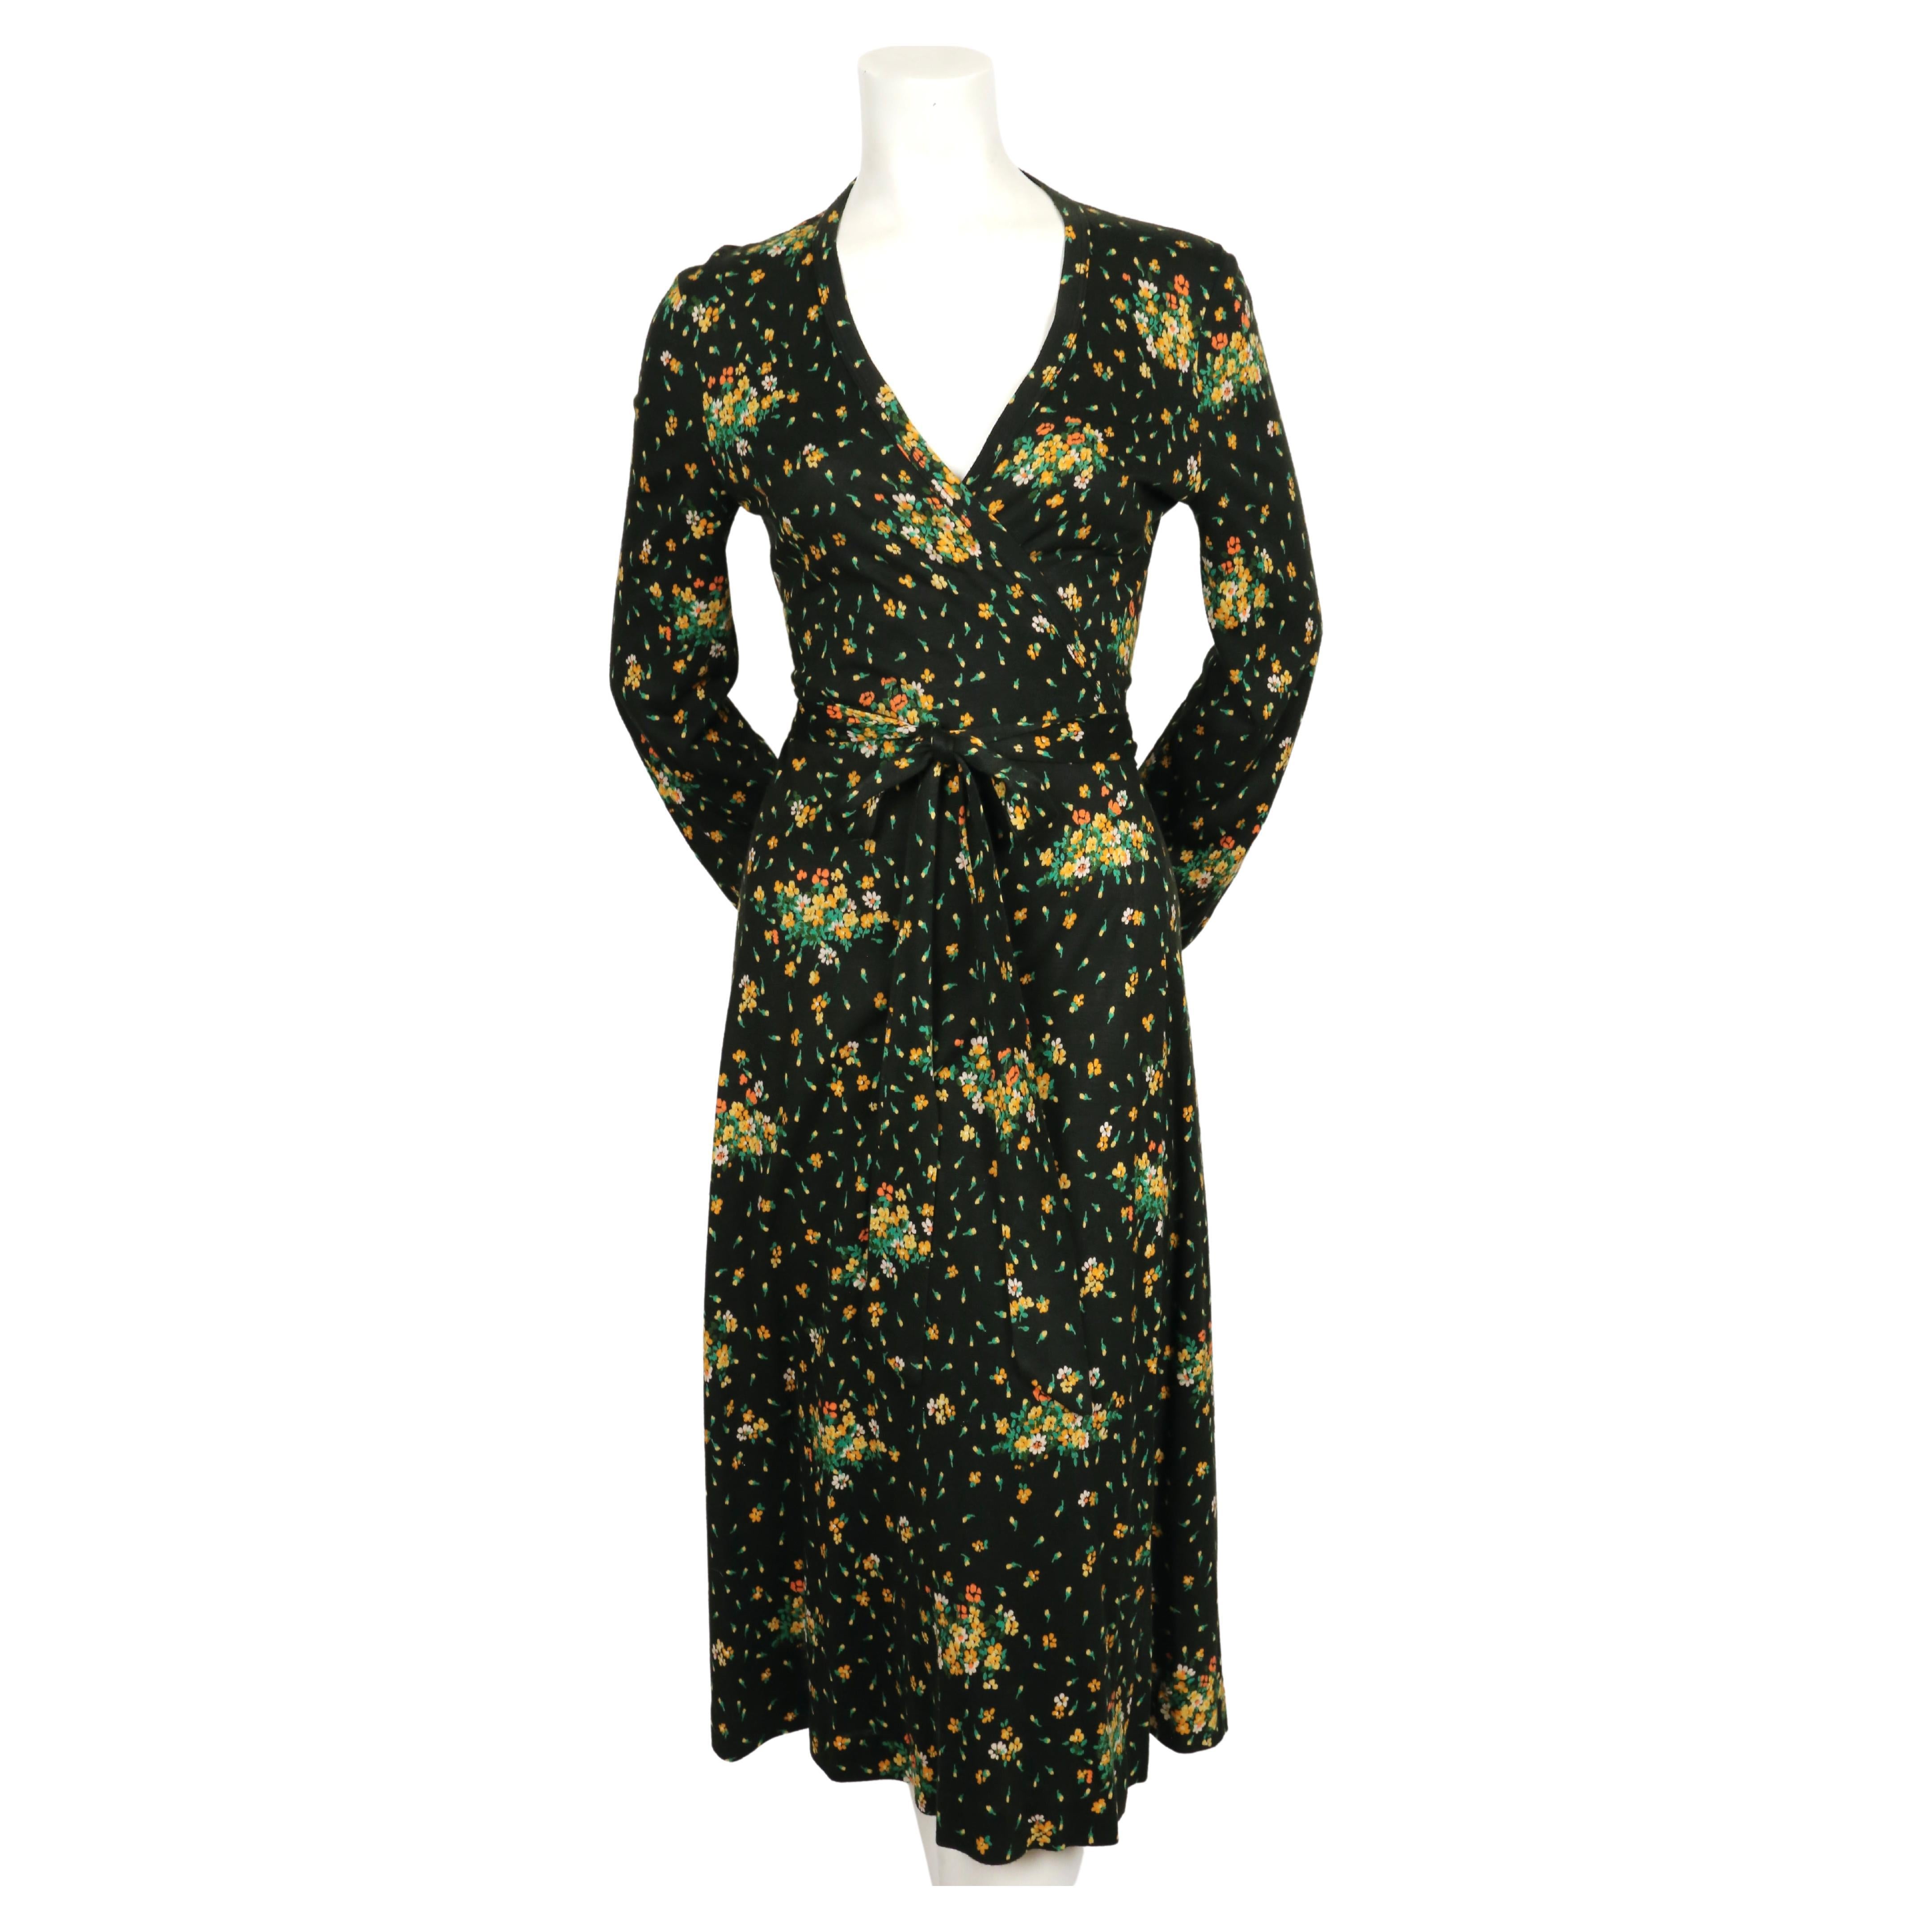 Black floral-printed wrap dress by Diane Von Furstenberg dating to the 1970's. Vintage size 10 however this fits much smaller. The dress was not clipped on the size 2 mannequin. Best fits a US 4-6.  Approximate measurements: shoulder 14.5